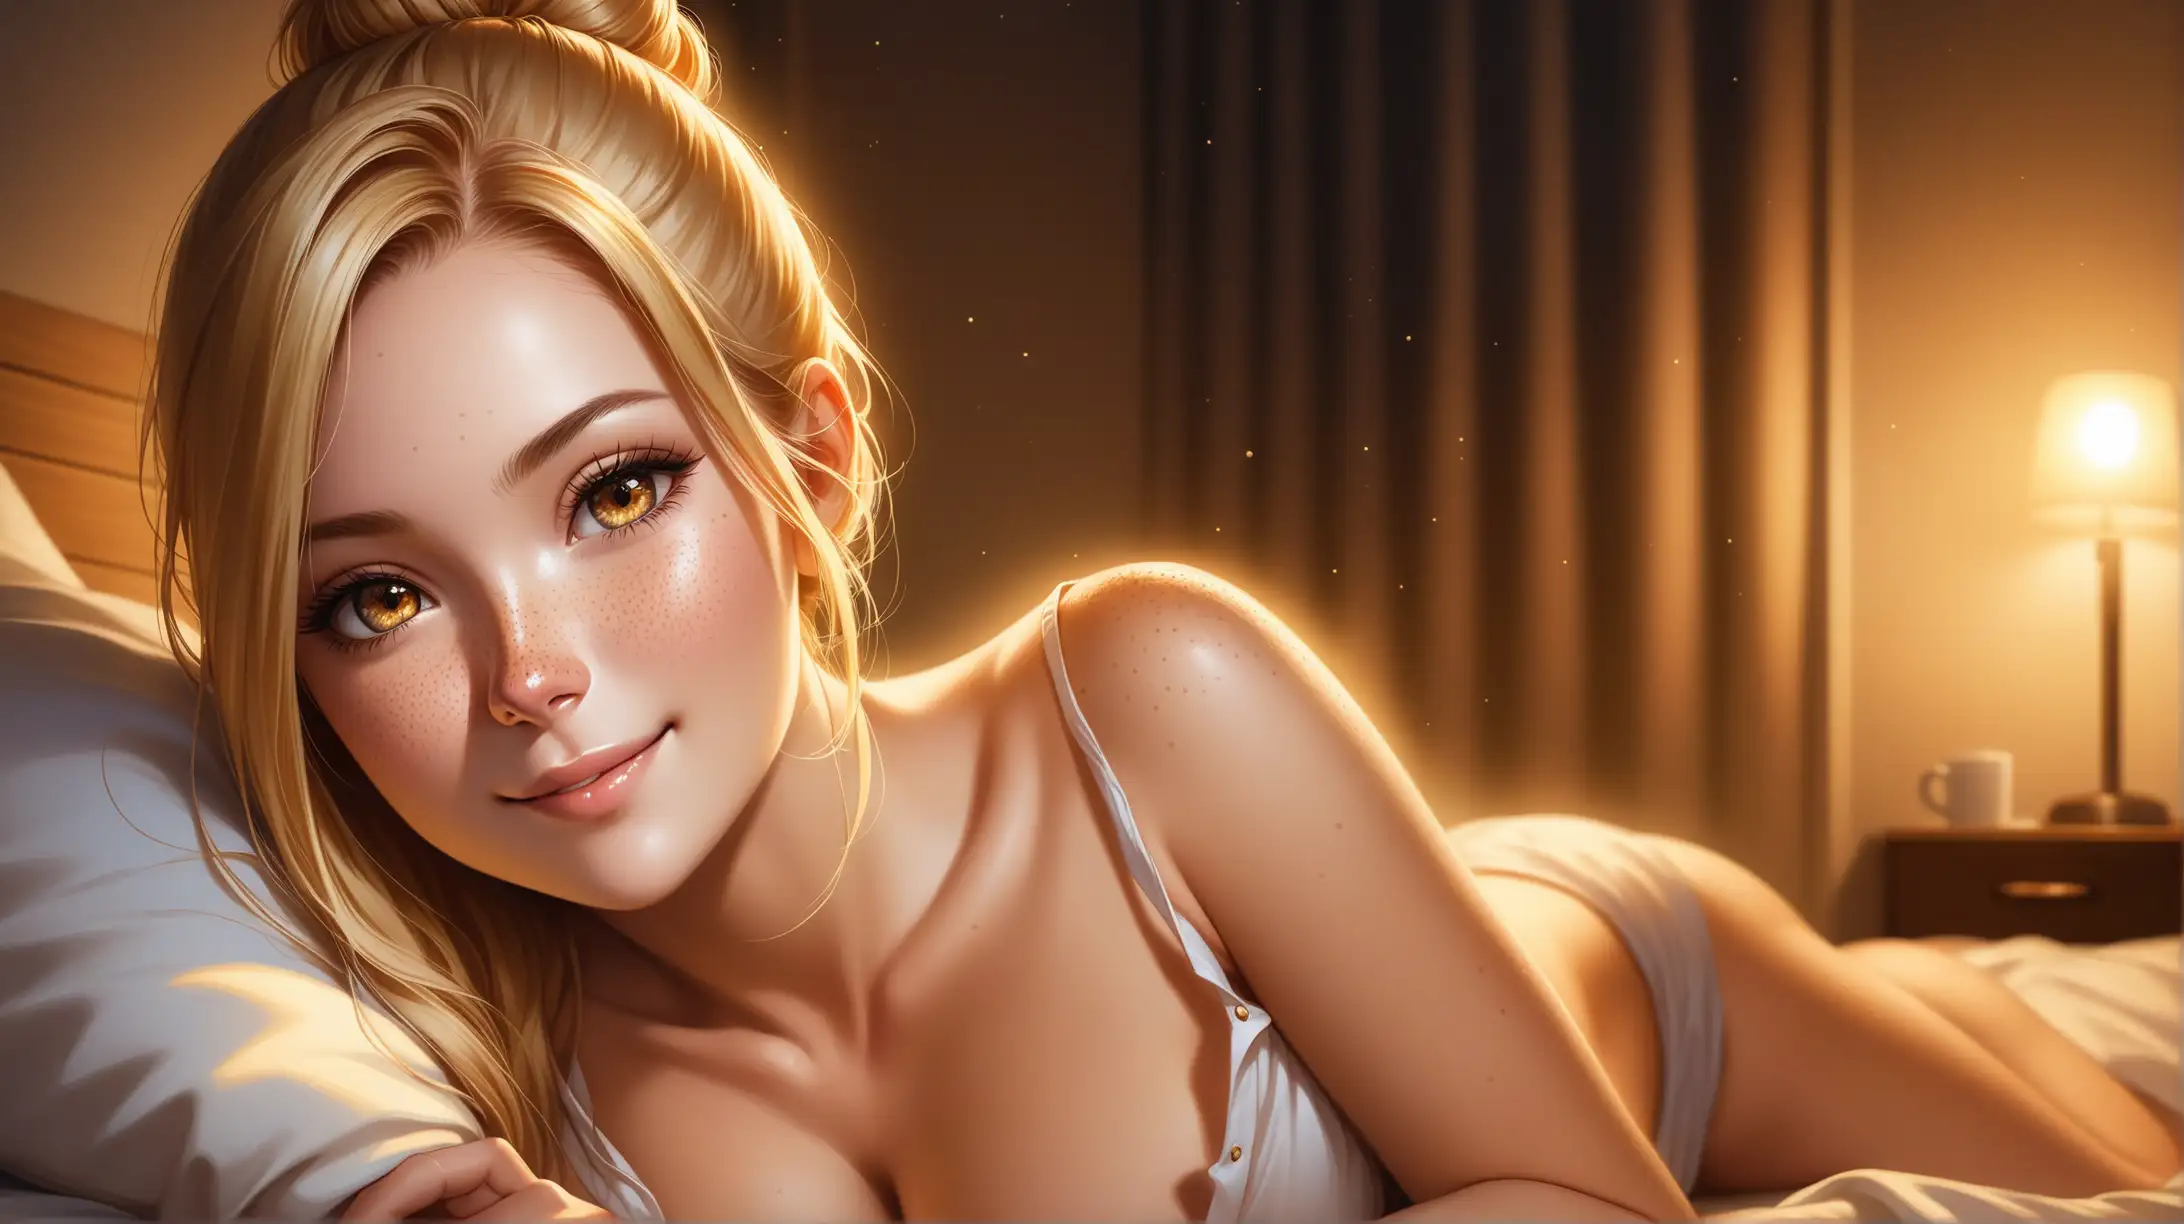 Draw a woman, long blonde hair in a bun, gold eyes, freckles, perky body, unbuttoned pajama top, panties, high quality, realistic, long shot, night lighting, indoors, bedroom, lying on back, seductive, revealing, smiling toward the viewer